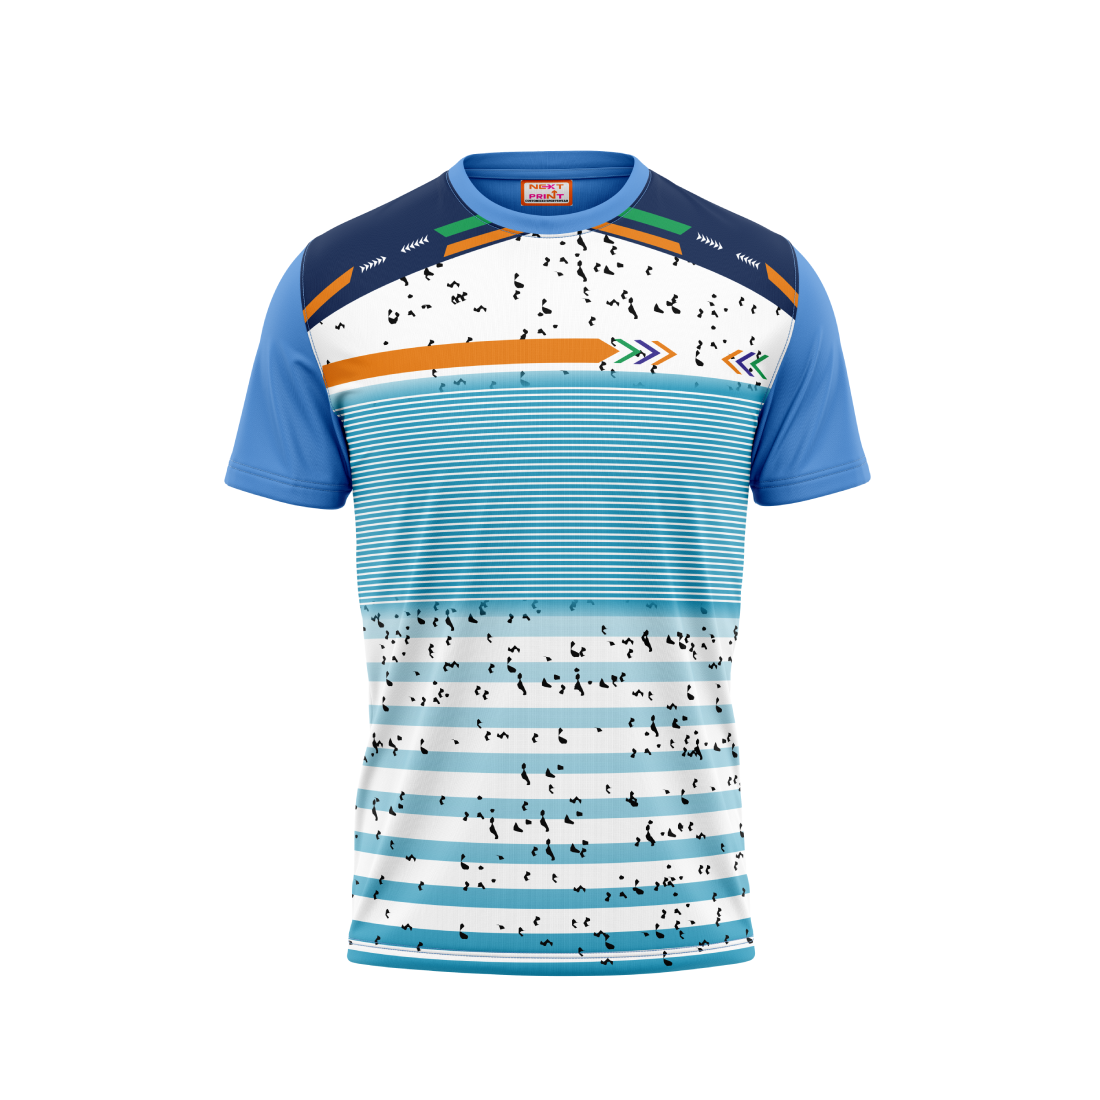 Round Neck Printed Jersey Skyblue NP00225